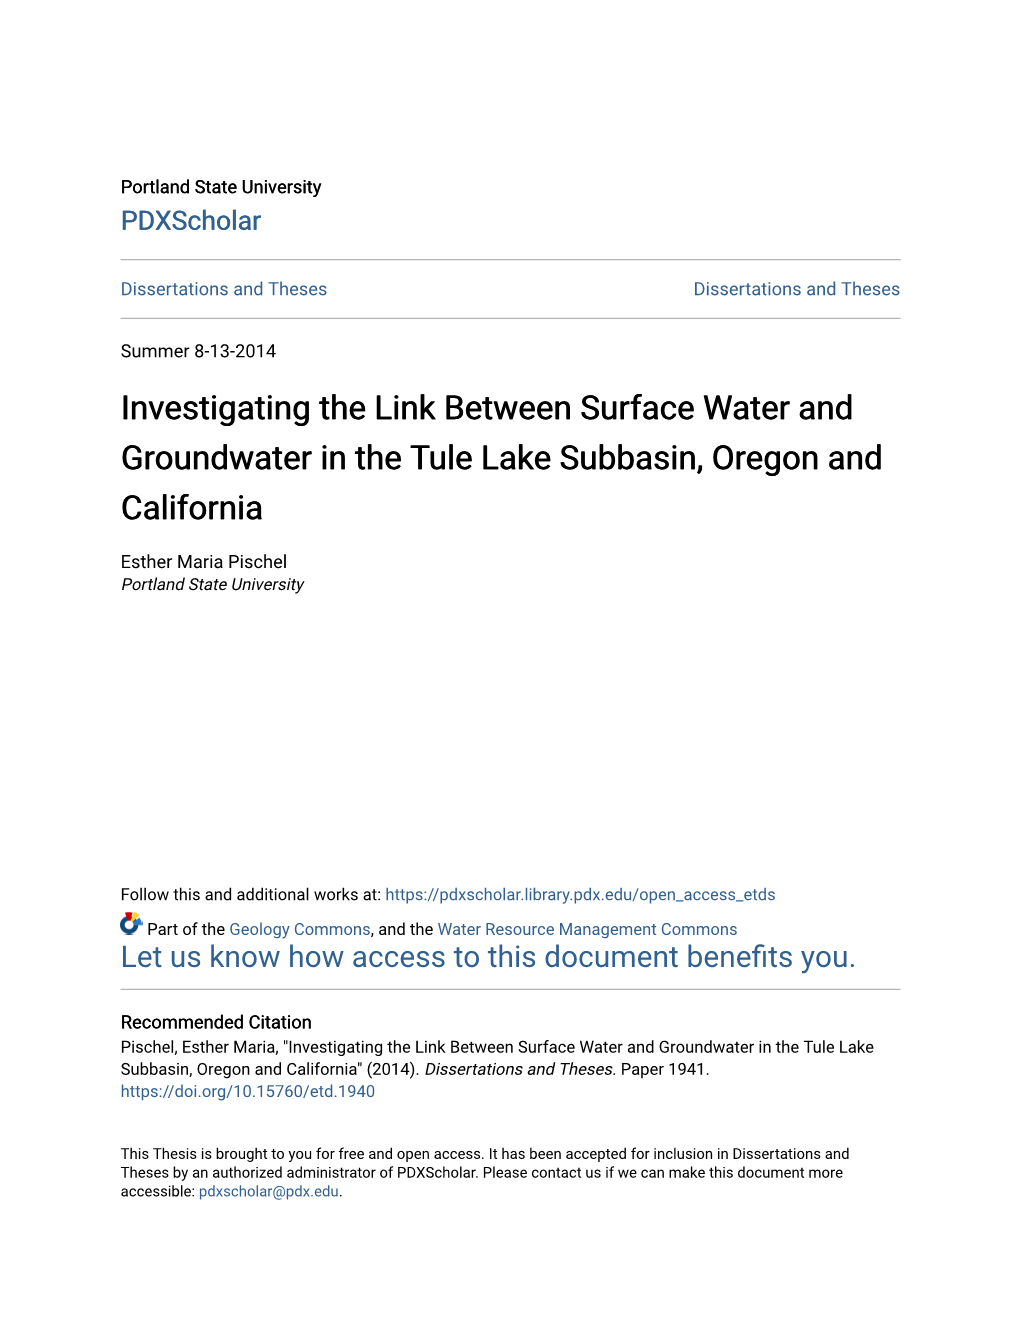 Investigating the Link Between Surface Water and Groundwater in the Tule Lake Subbasin, Oregon and California